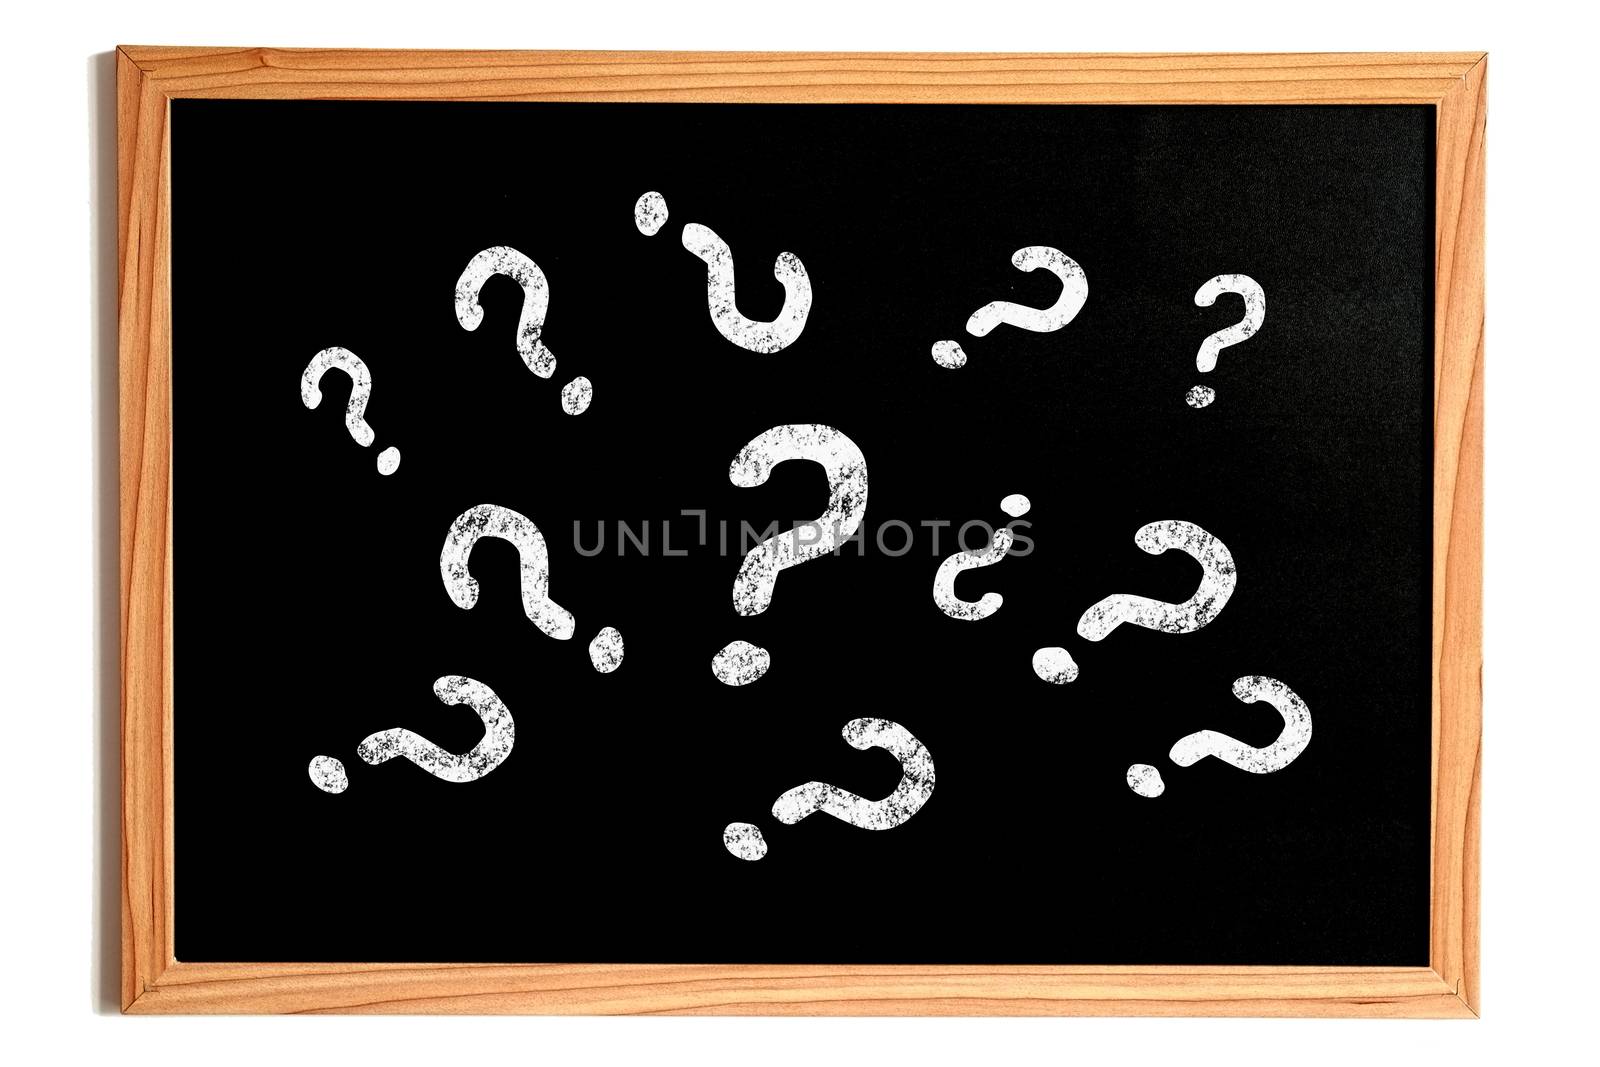 Many Chalk Question Marks Text on Chalkboard with Wooden Frame Isolated on White